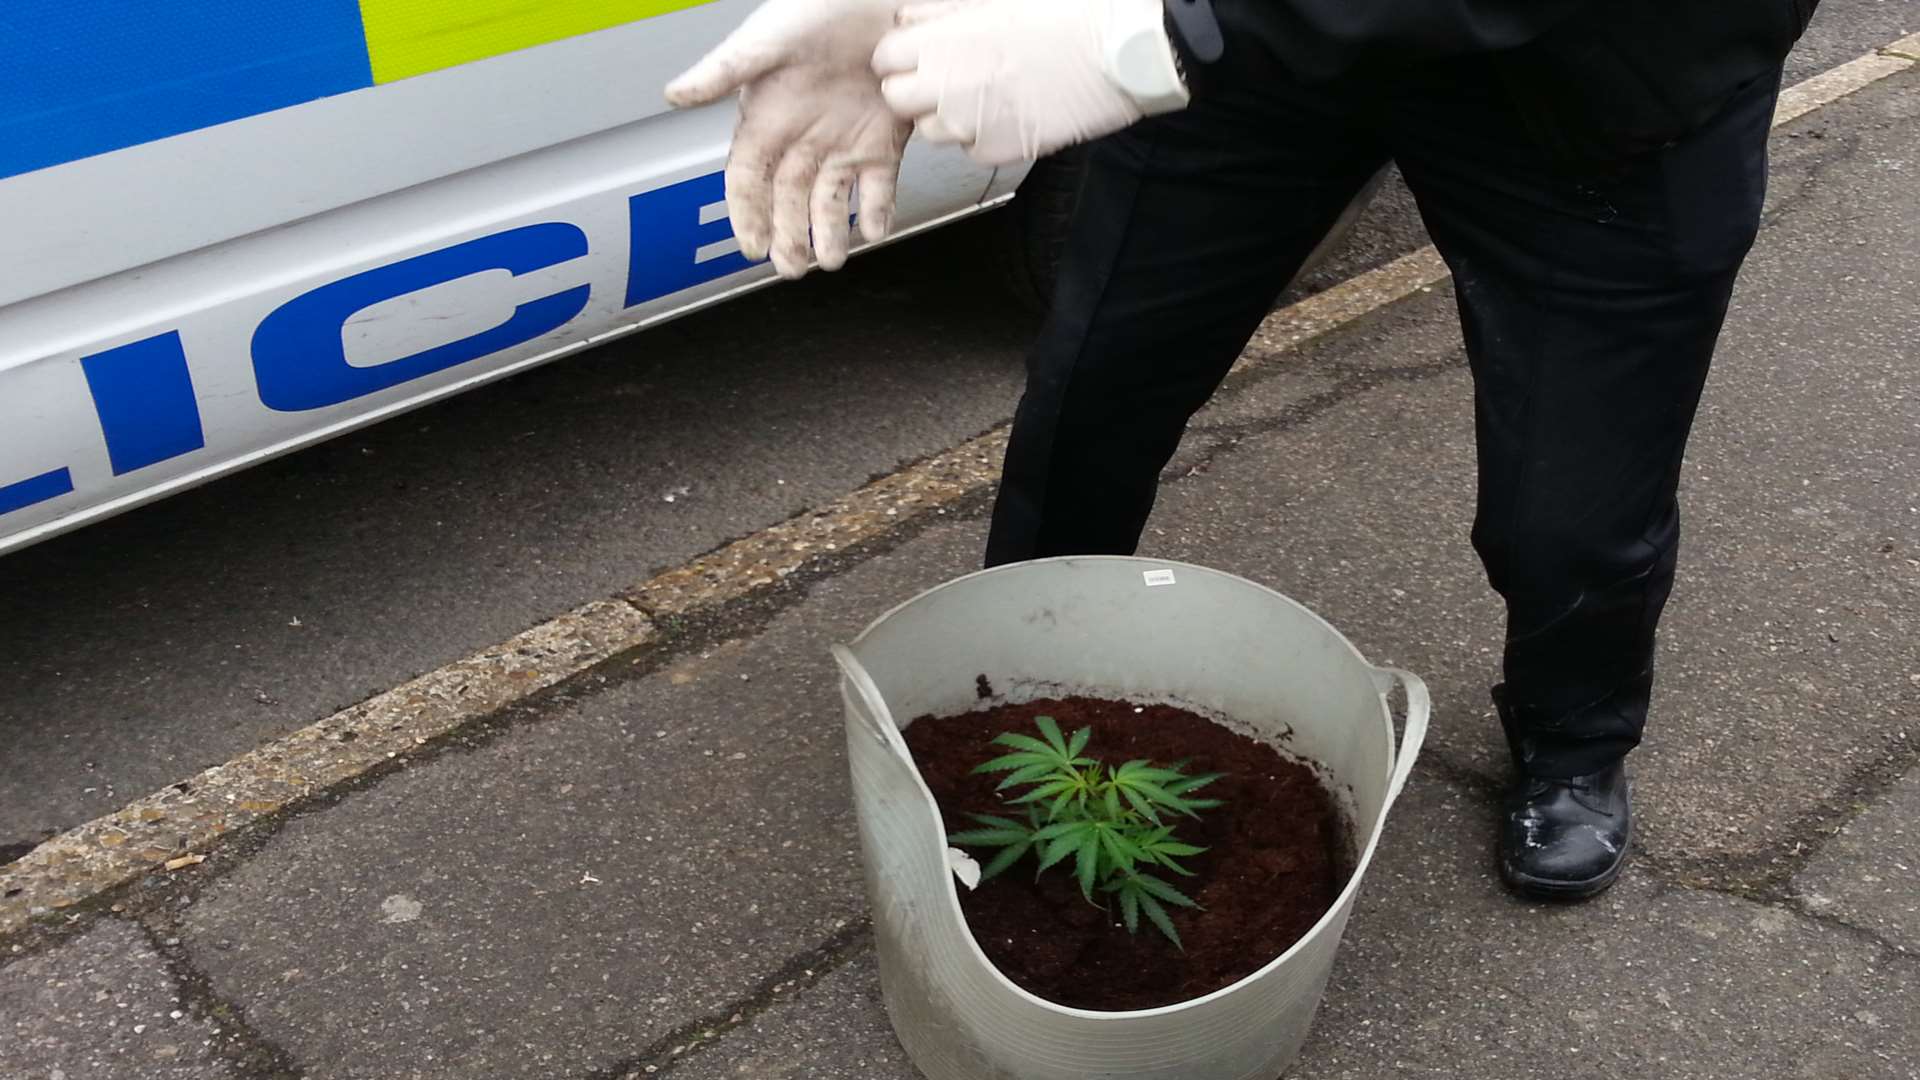 A suspected cannabis plant found by police in Detling